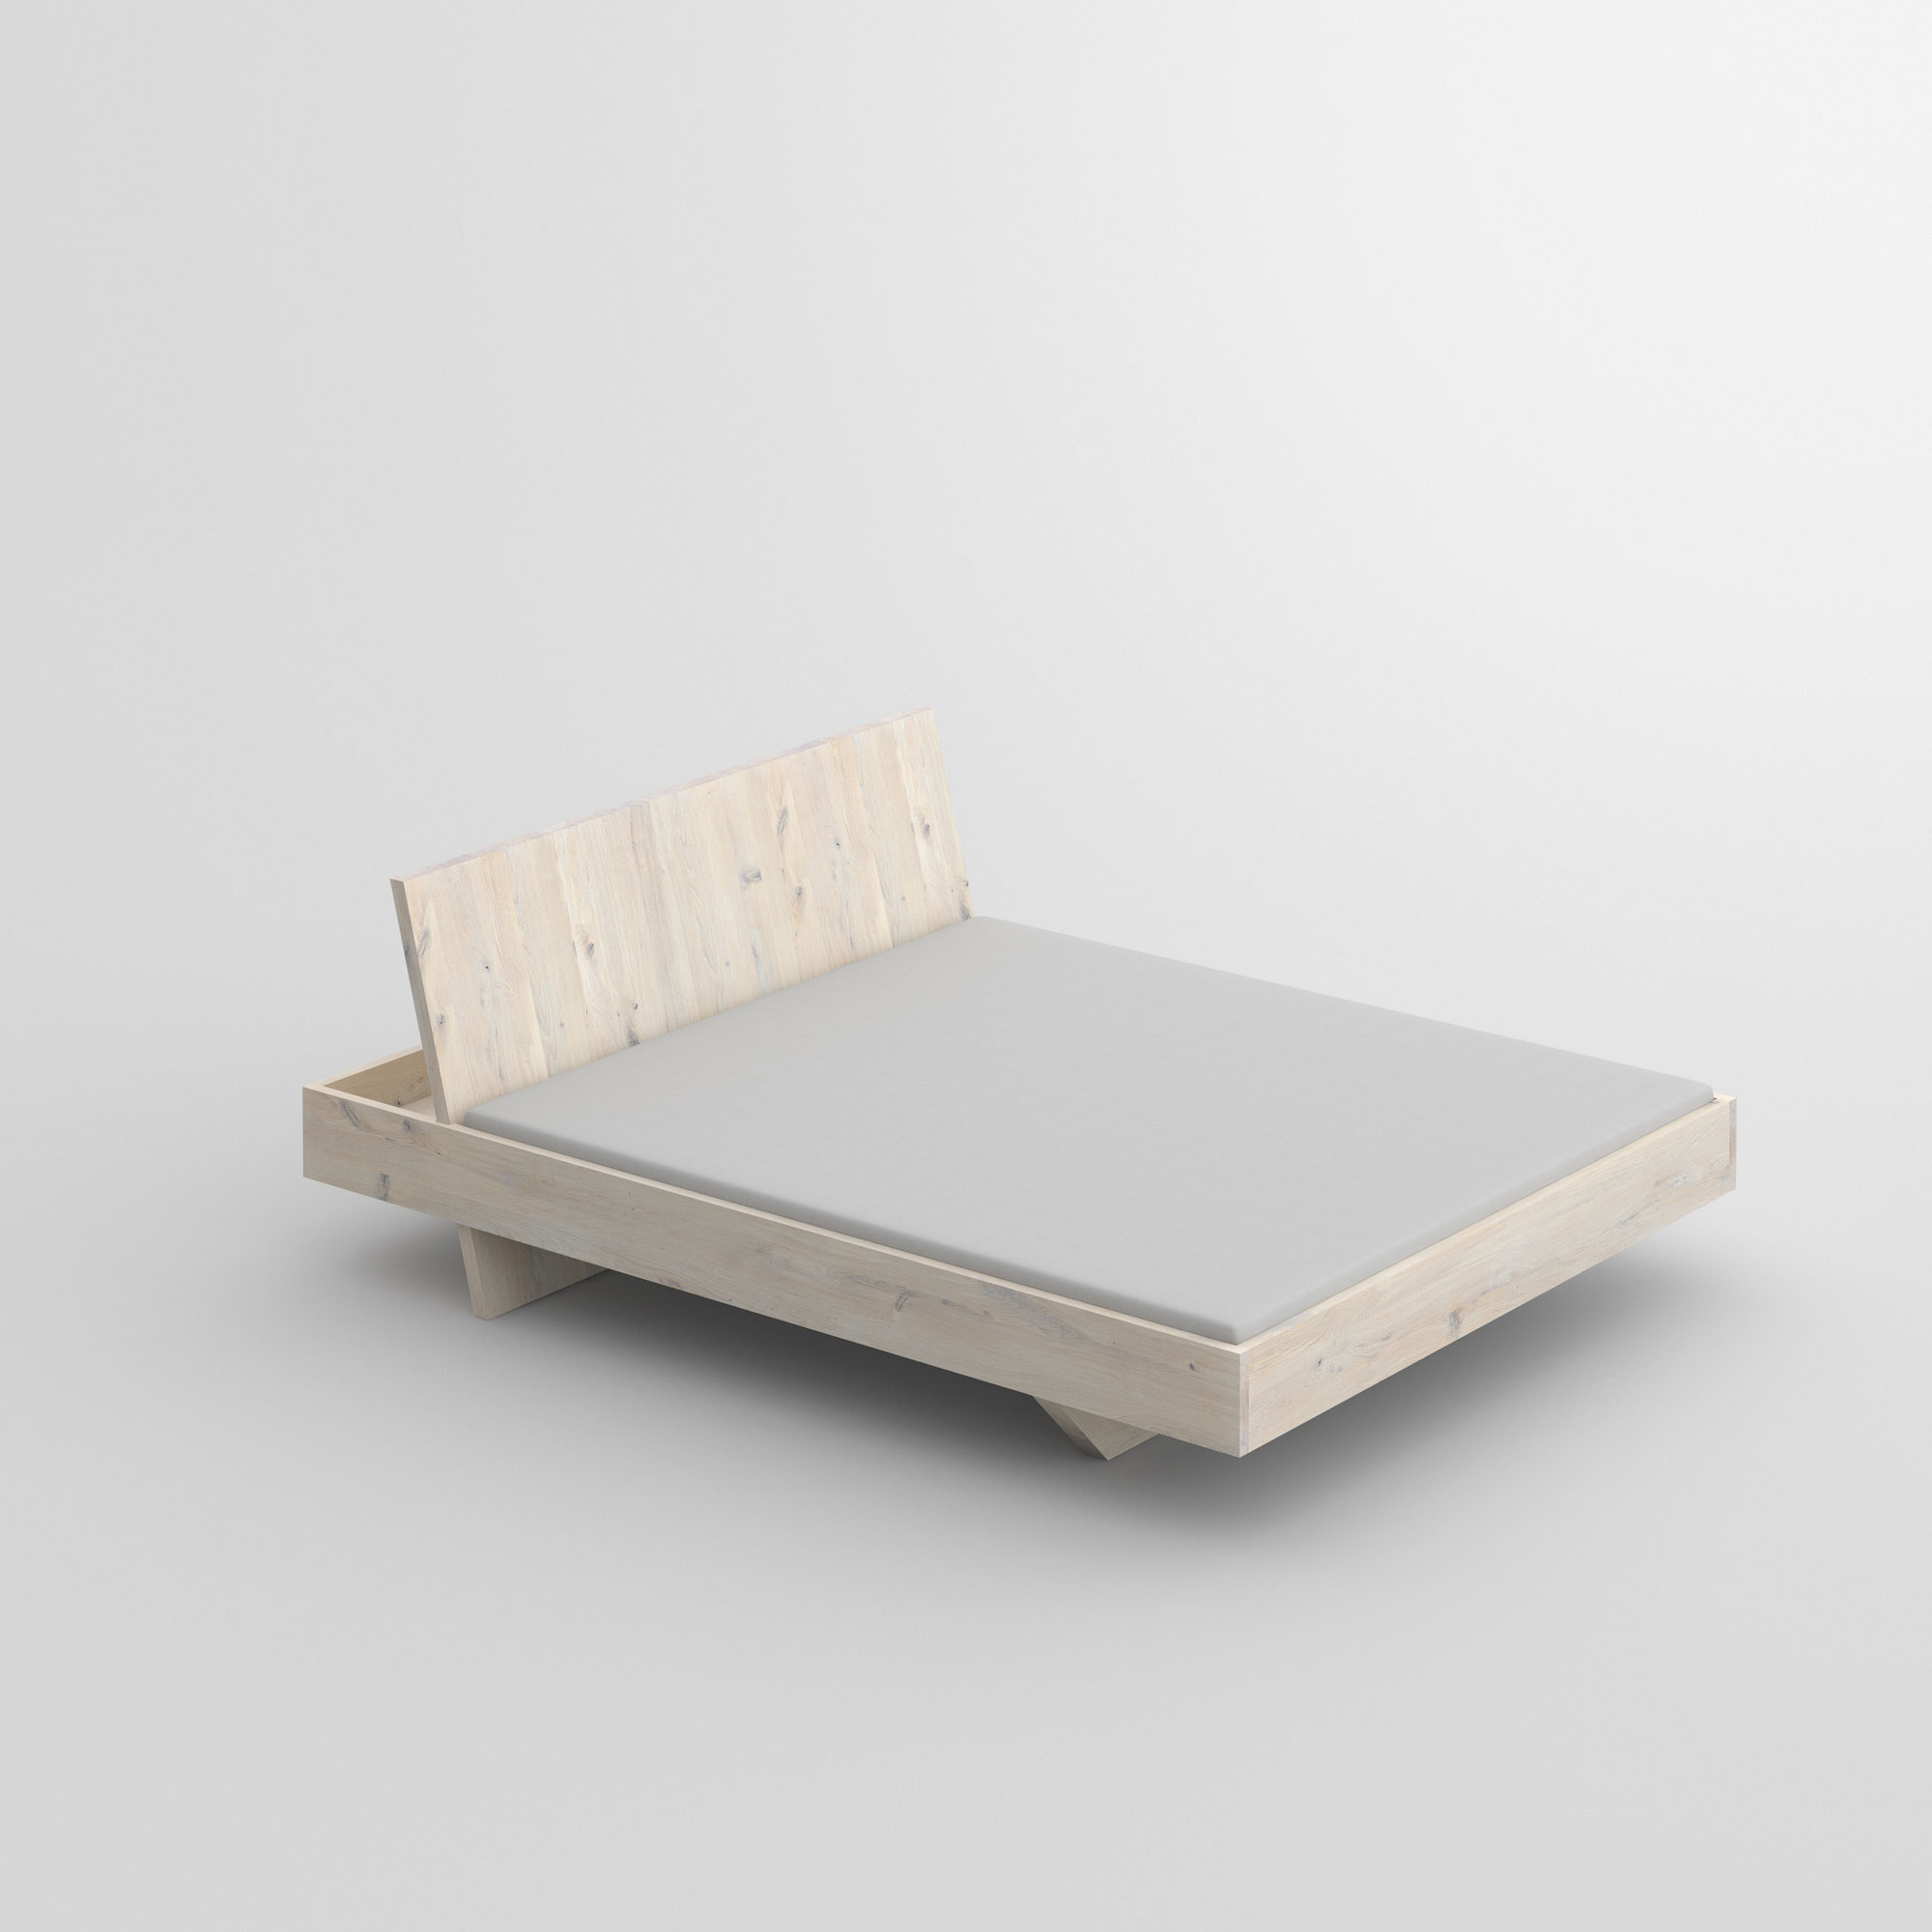 Design Solid Wood Bed SOMNIA cam2 custom made in solid wood by vitamin design